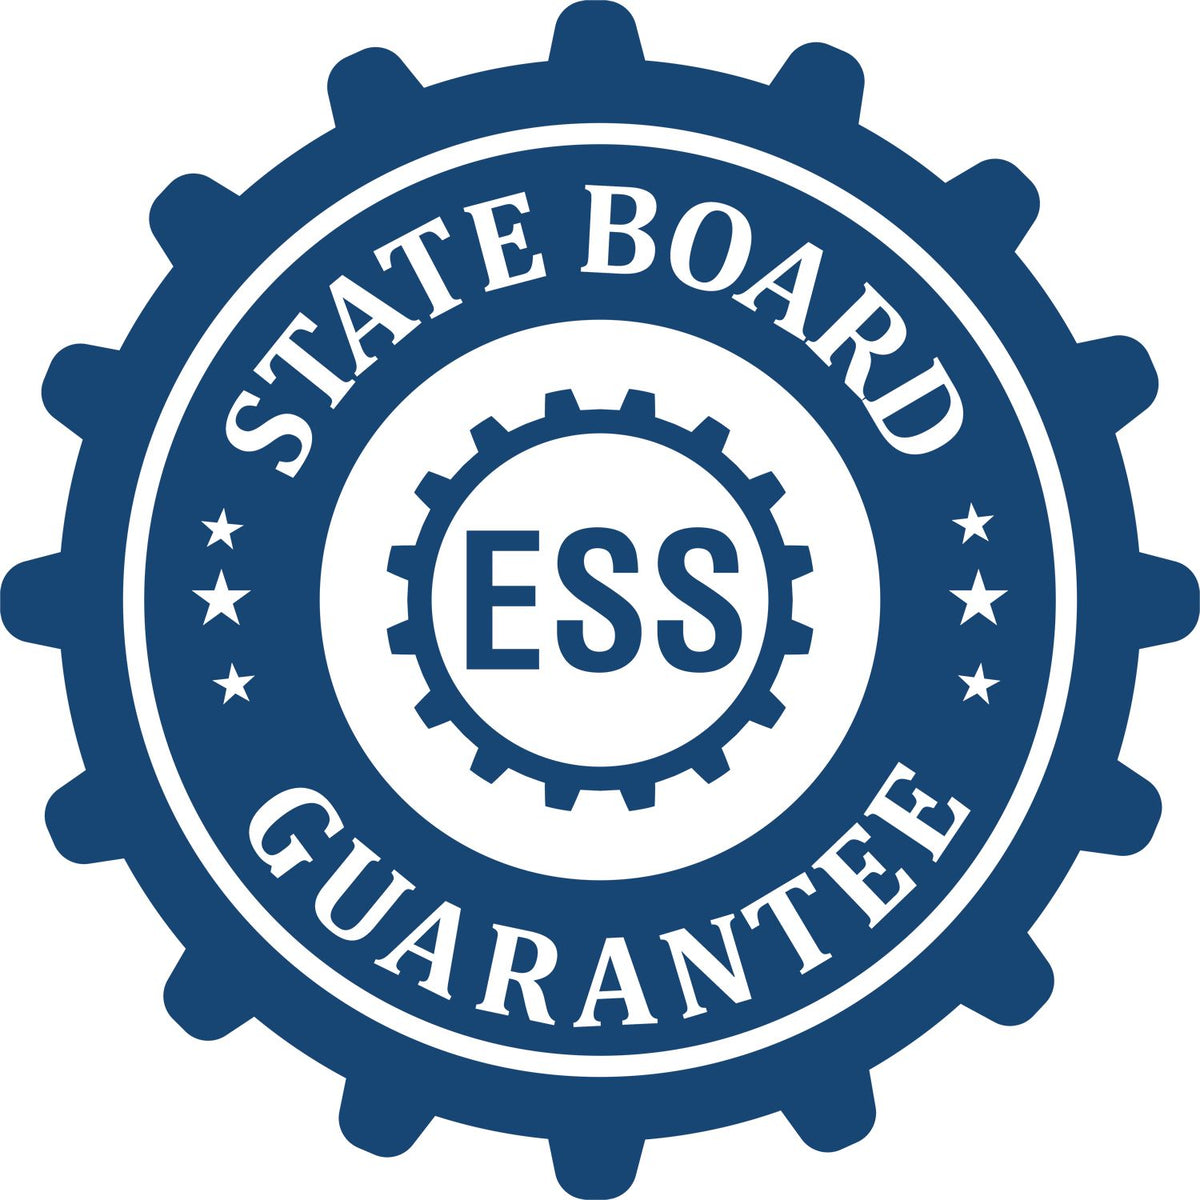 An emblem in a gear shape illustrating a state board guarantee for the Heavy-Duty Alaska Rectangular Notary Stamp product.